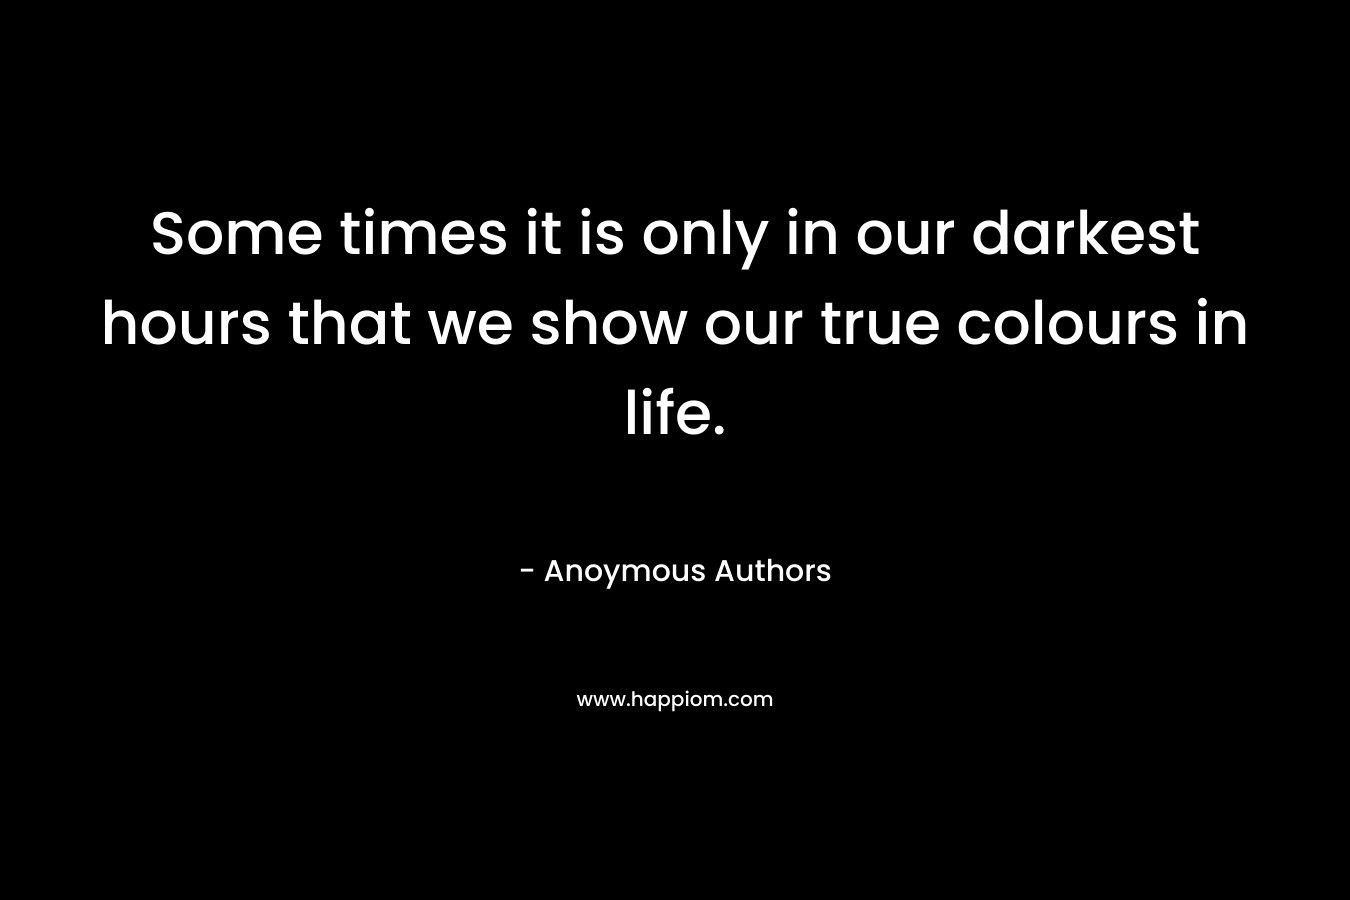 Some times it is only in our darkest hours that we show our true colours in life. – Anoymous Authors